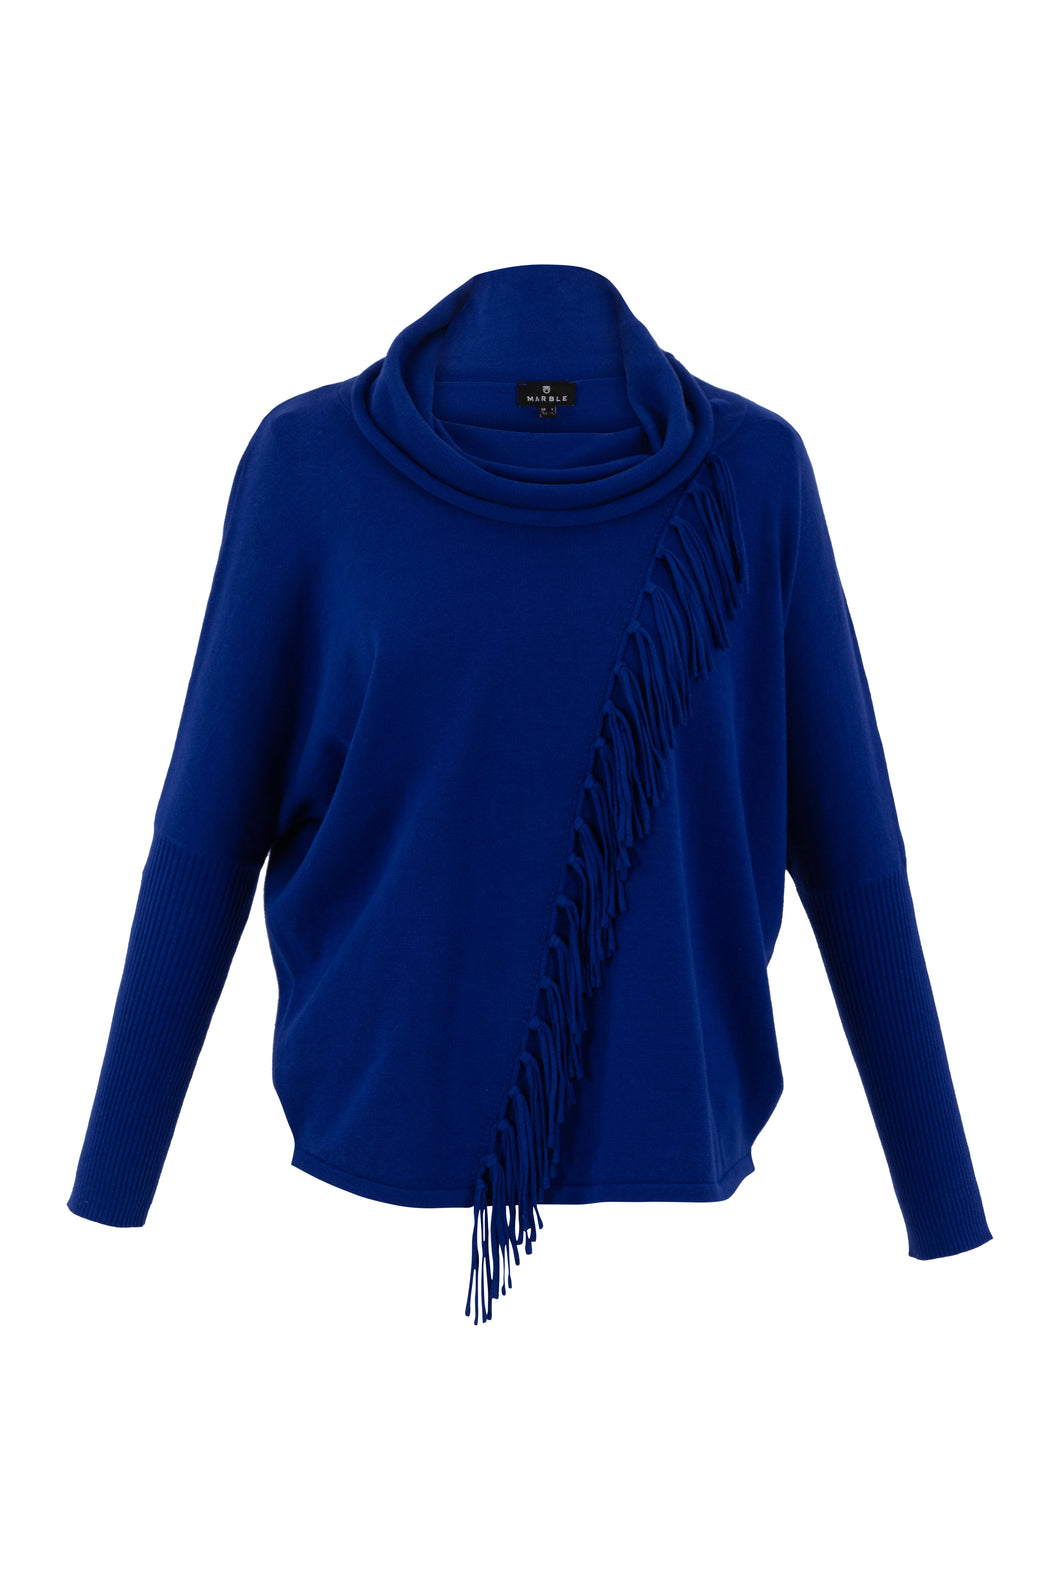 MARBLE FASHIONS 6373 SWEATER COLOUR 210 - ROYAL BLUE